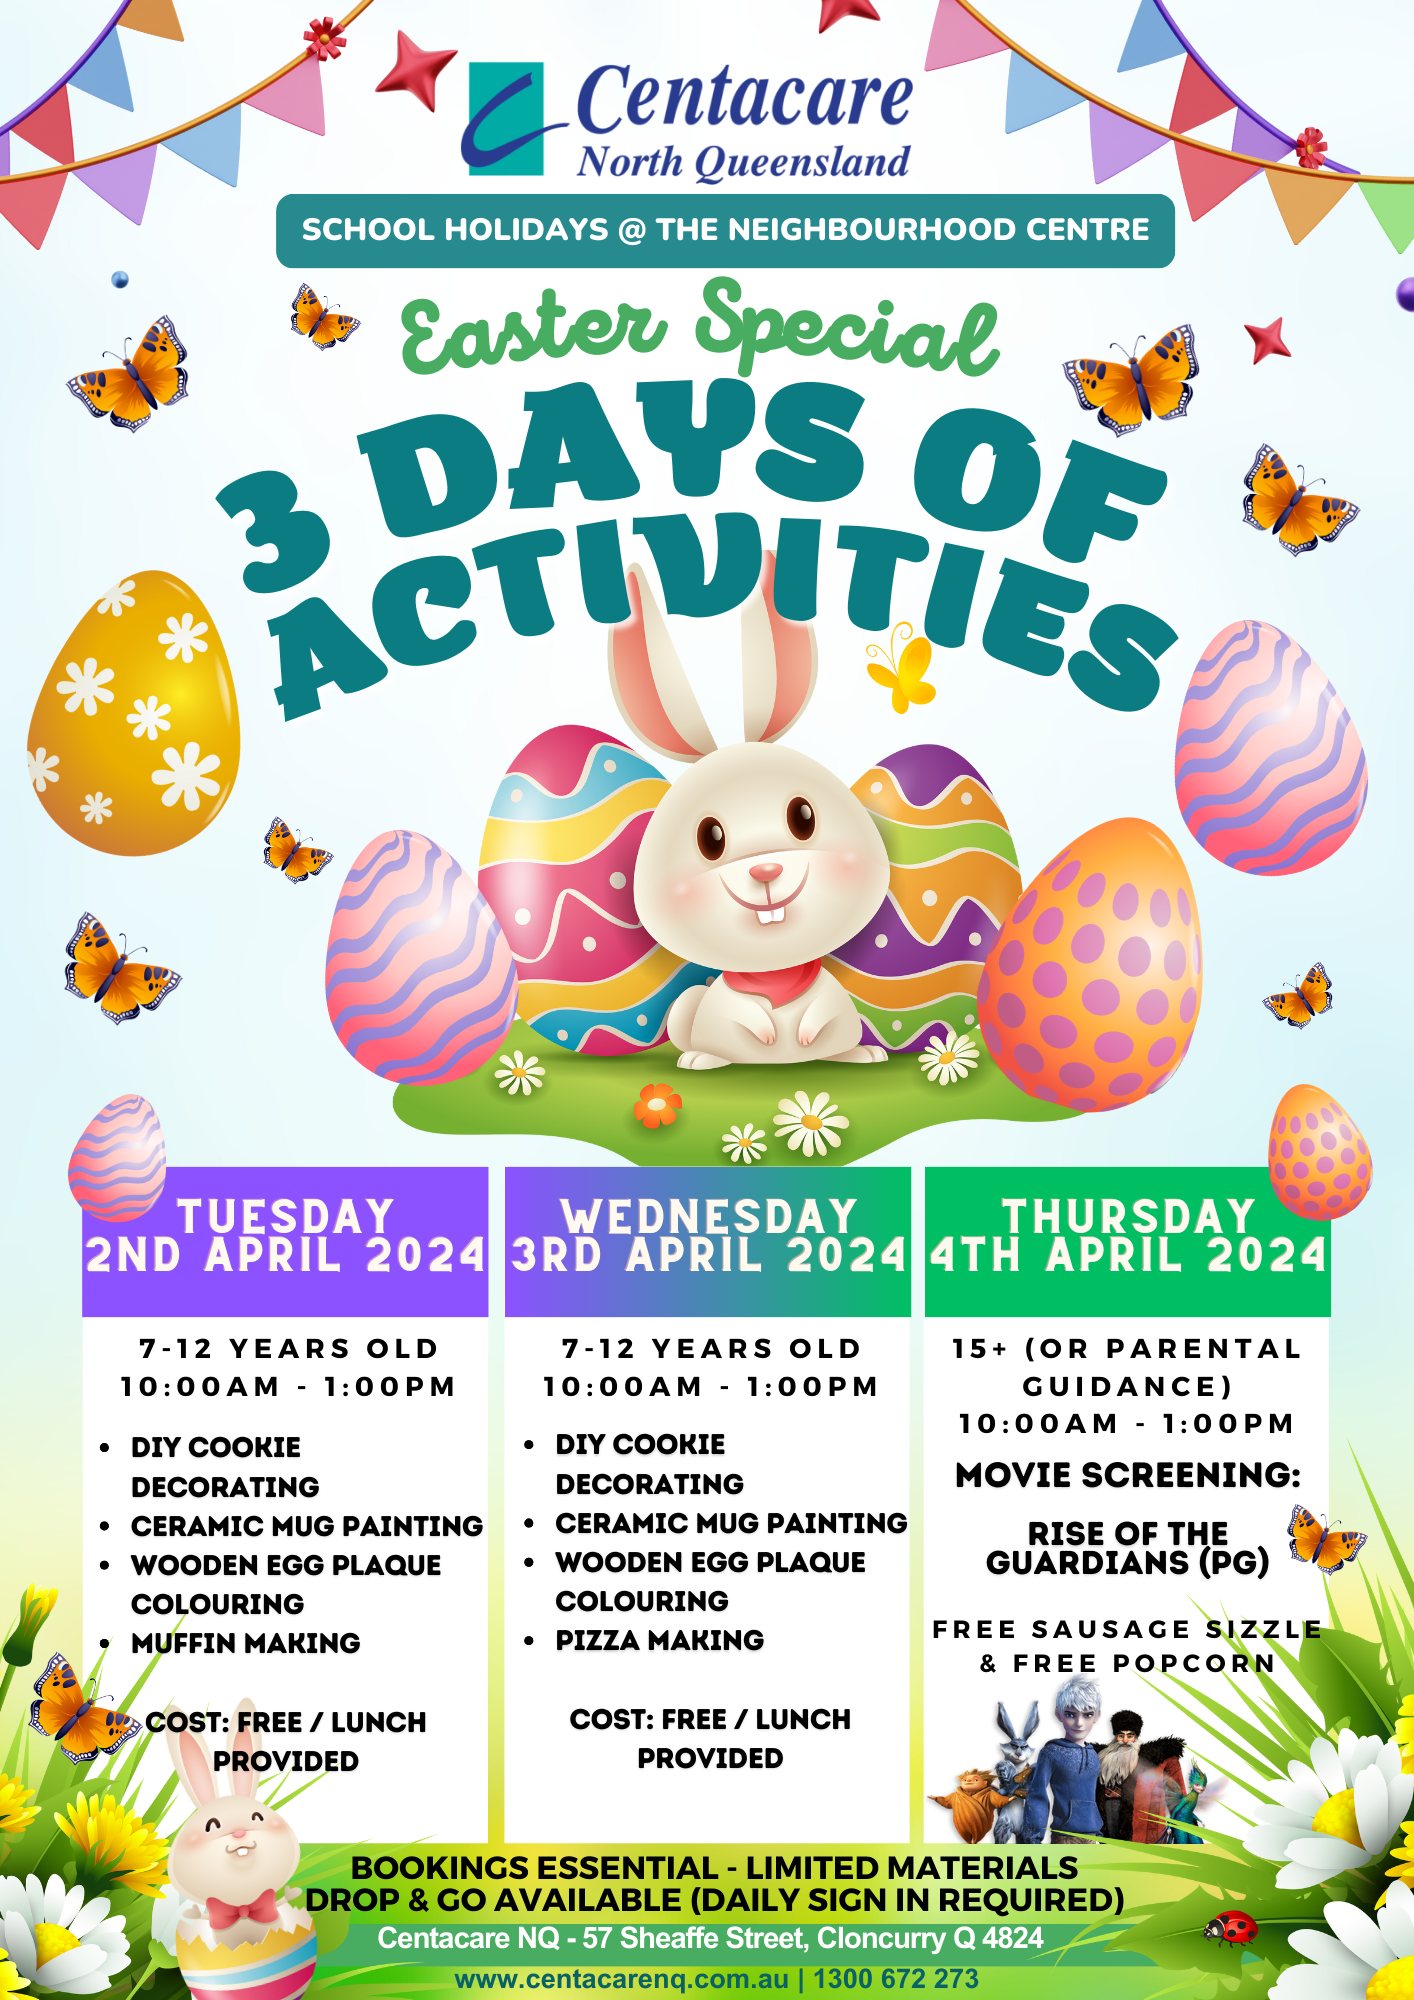 Centacare Holiday Activities